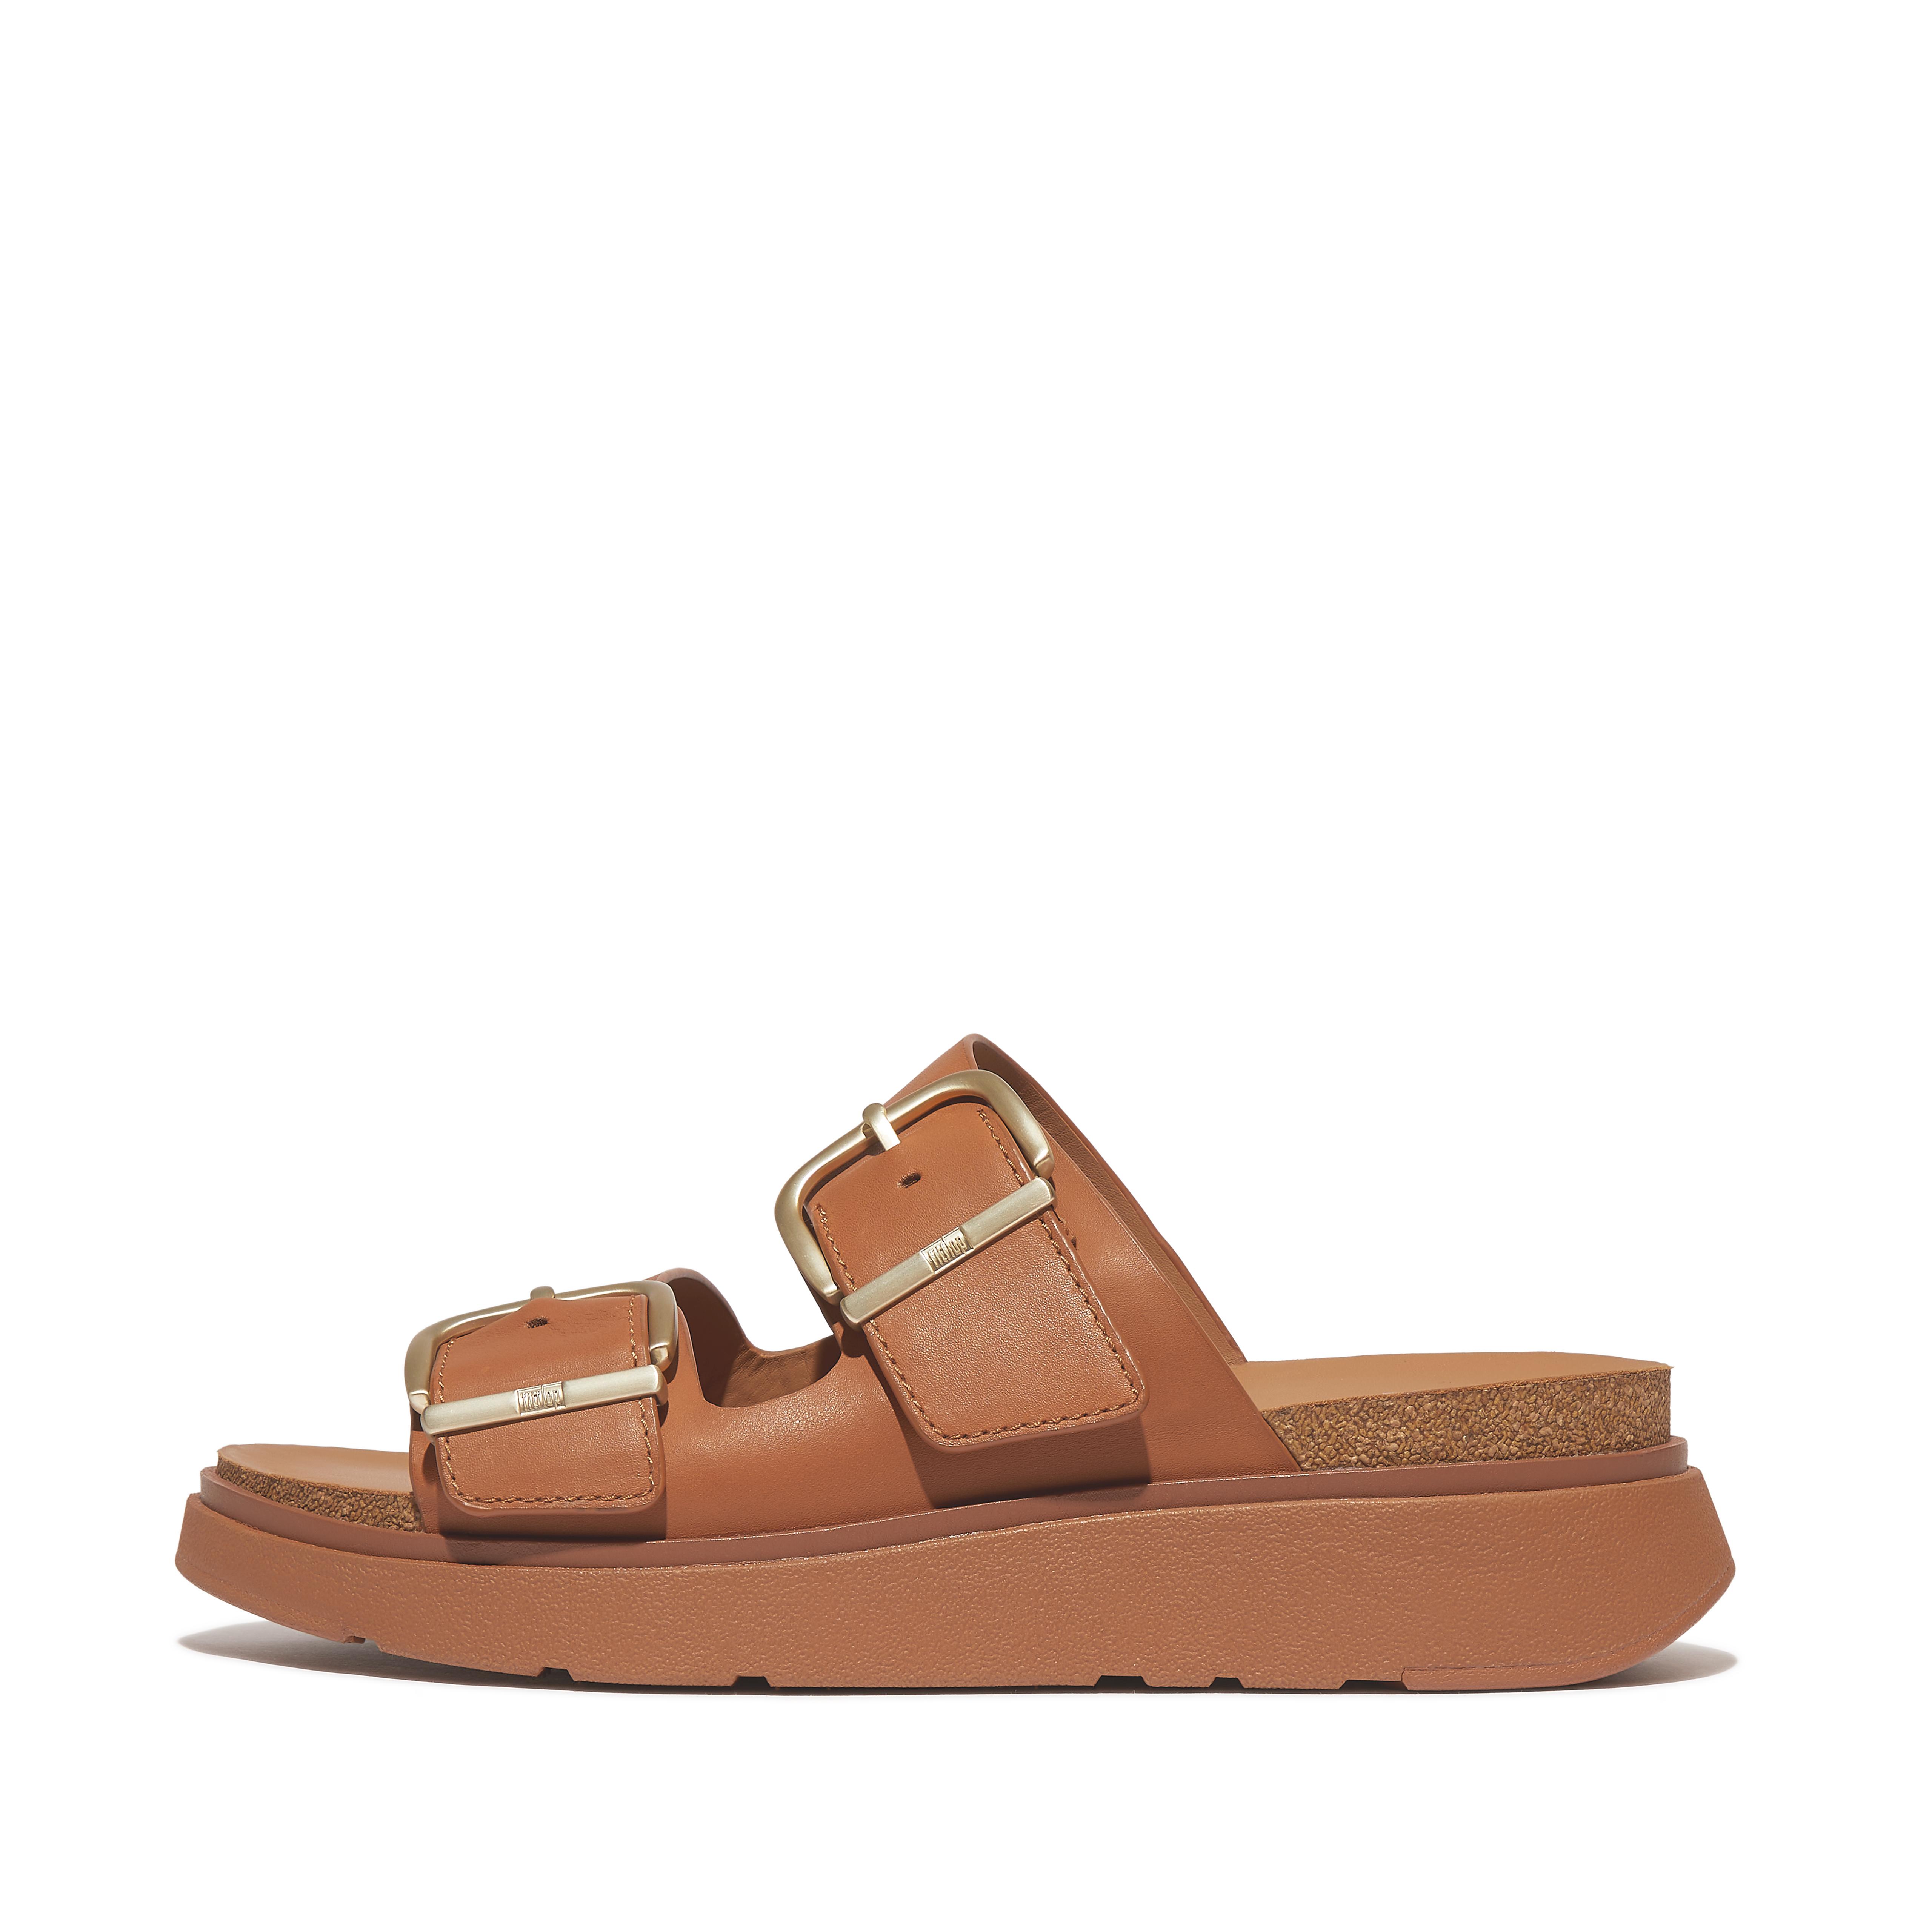 Fitflop Buckle Two-Bar Leather Slides,Light Tan